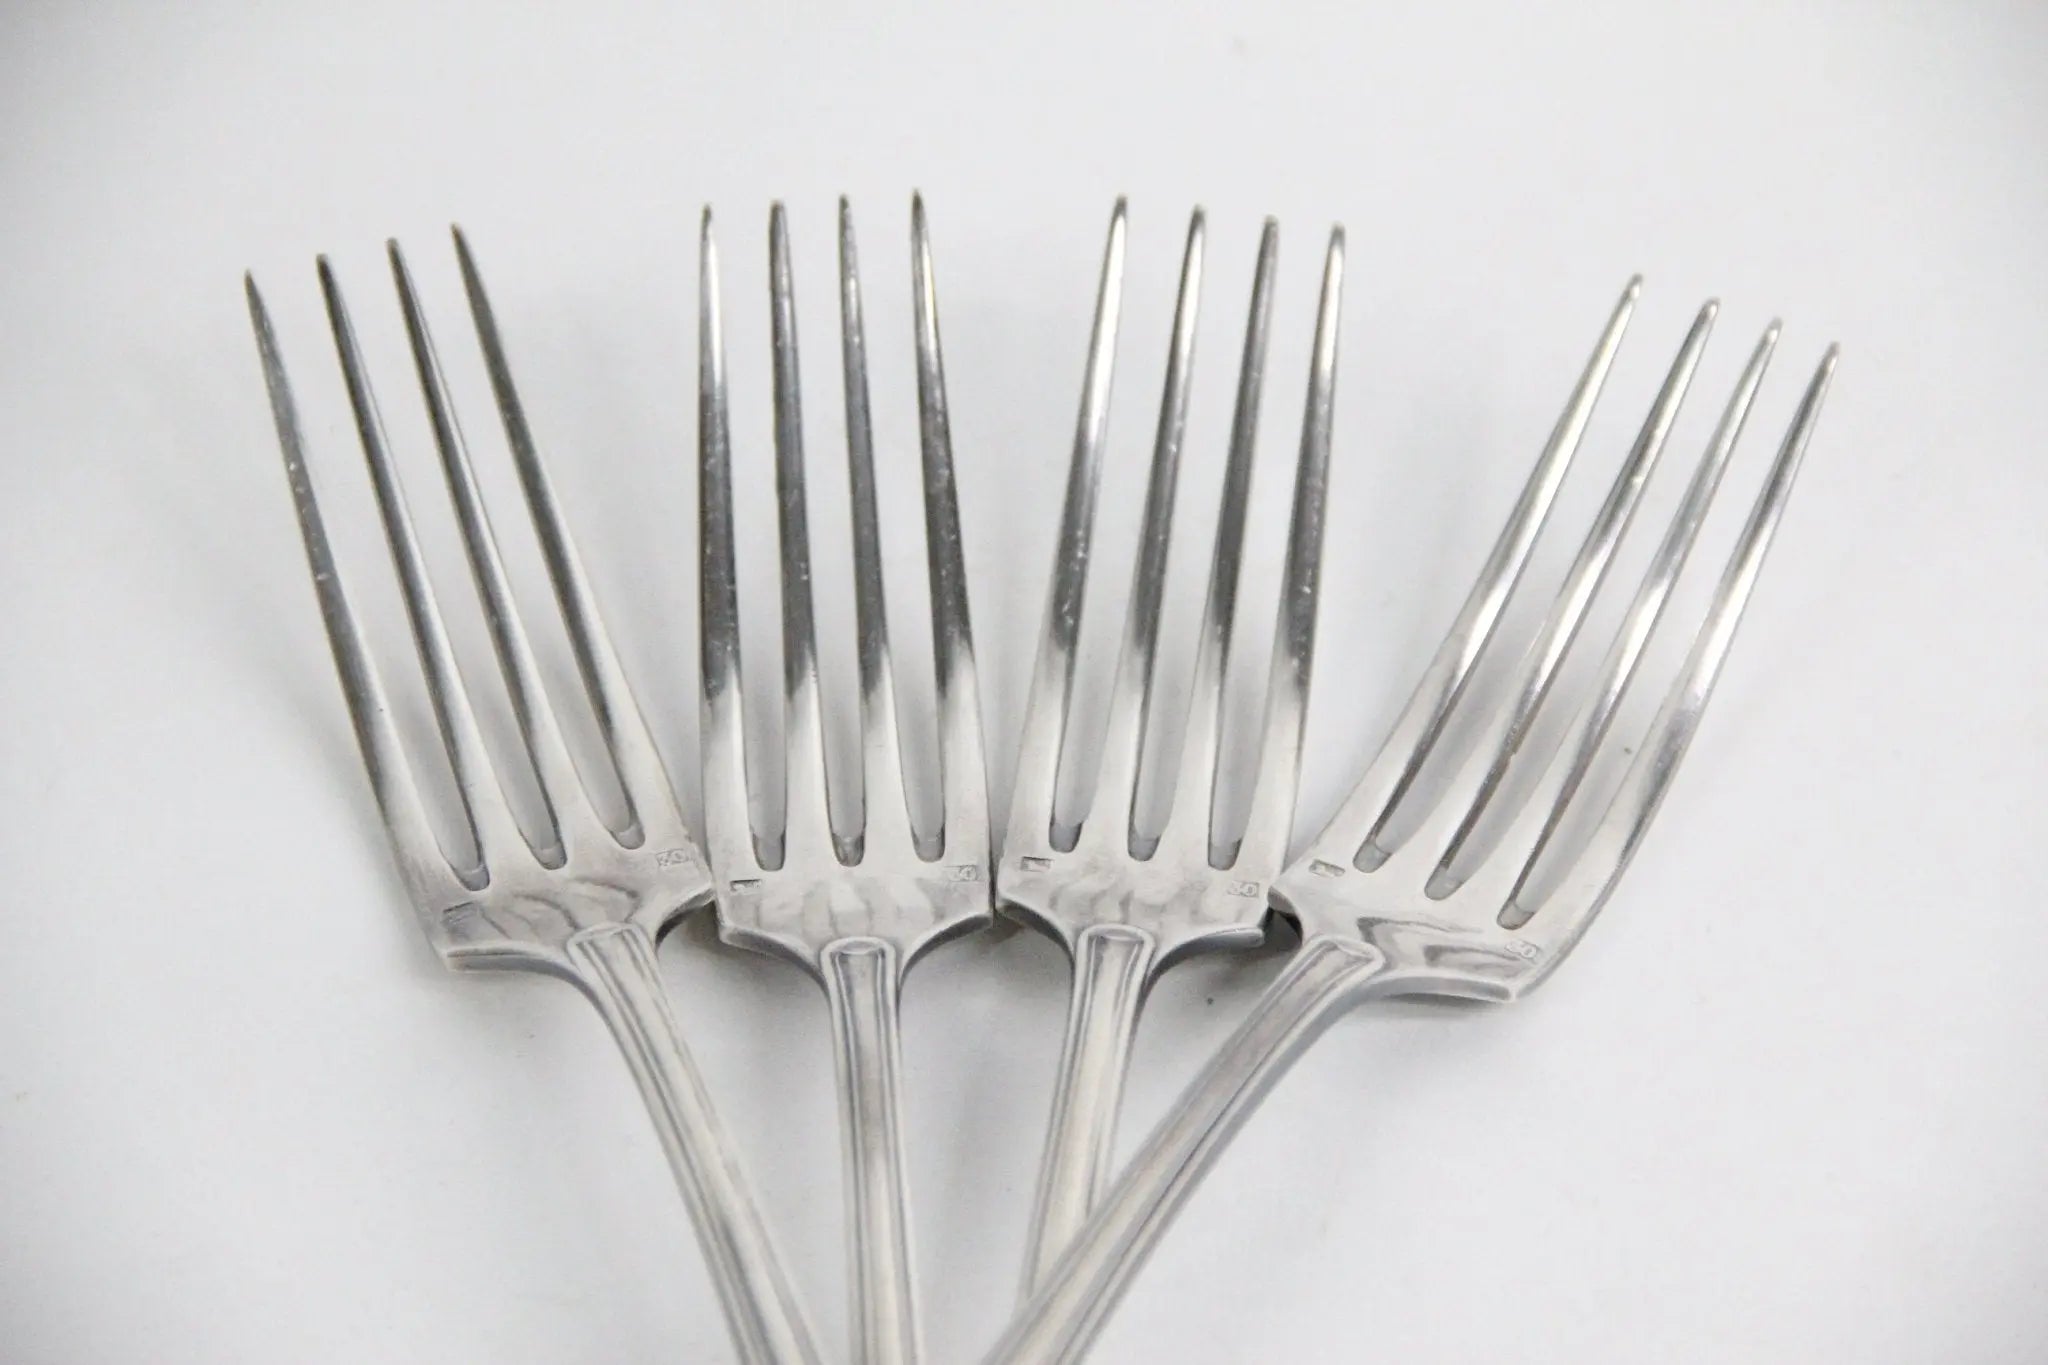 Antique Silver Flatware | French Forks  Debra Hall Lifestyle